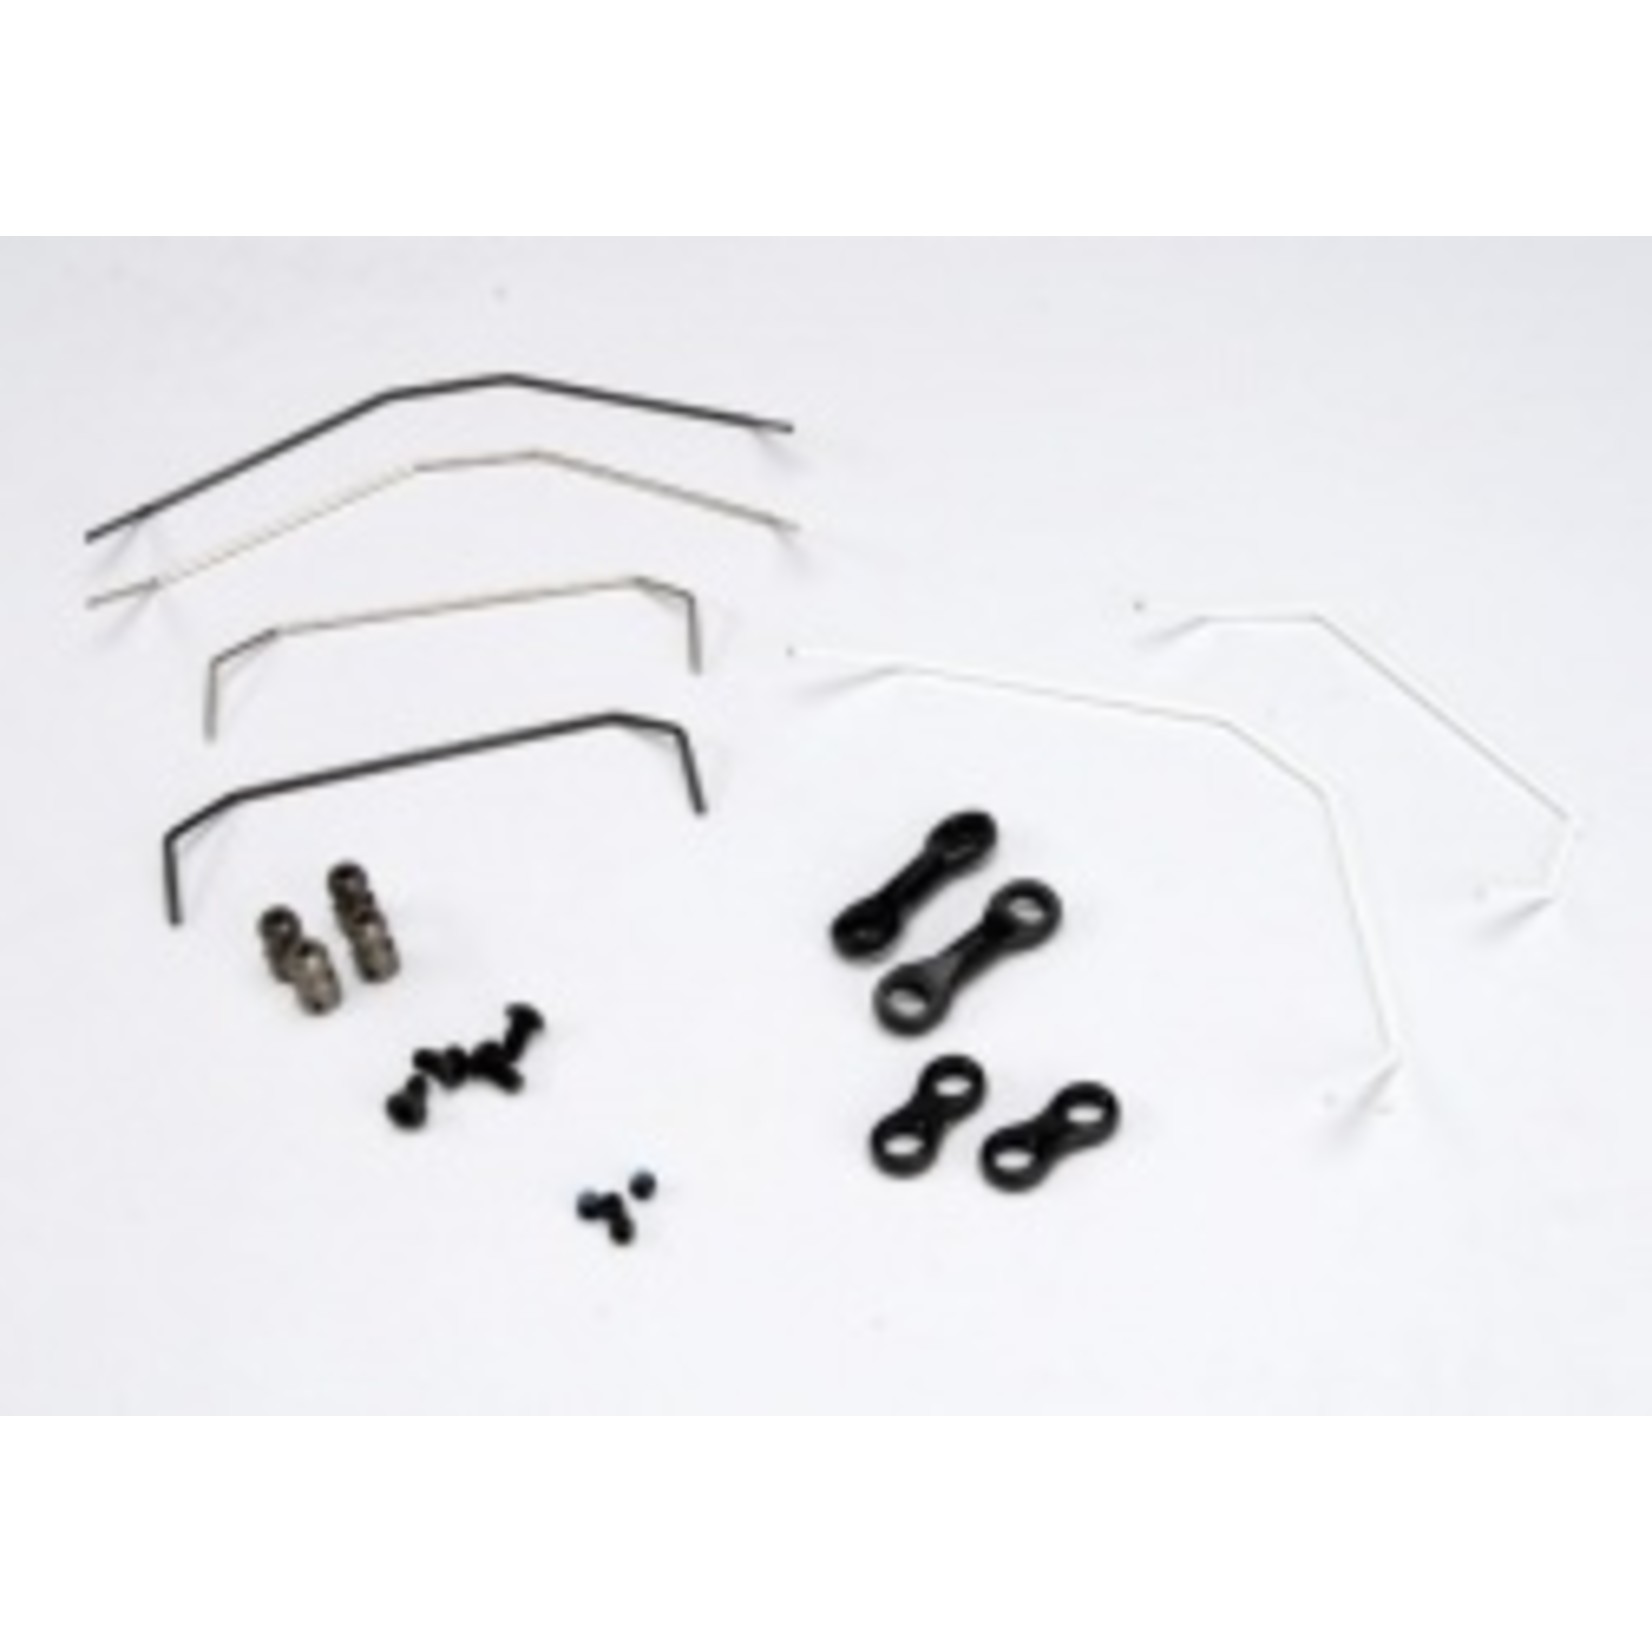 Traxxas 5589X Sway bar kit (front and rear) (includes sway bars and linkage)